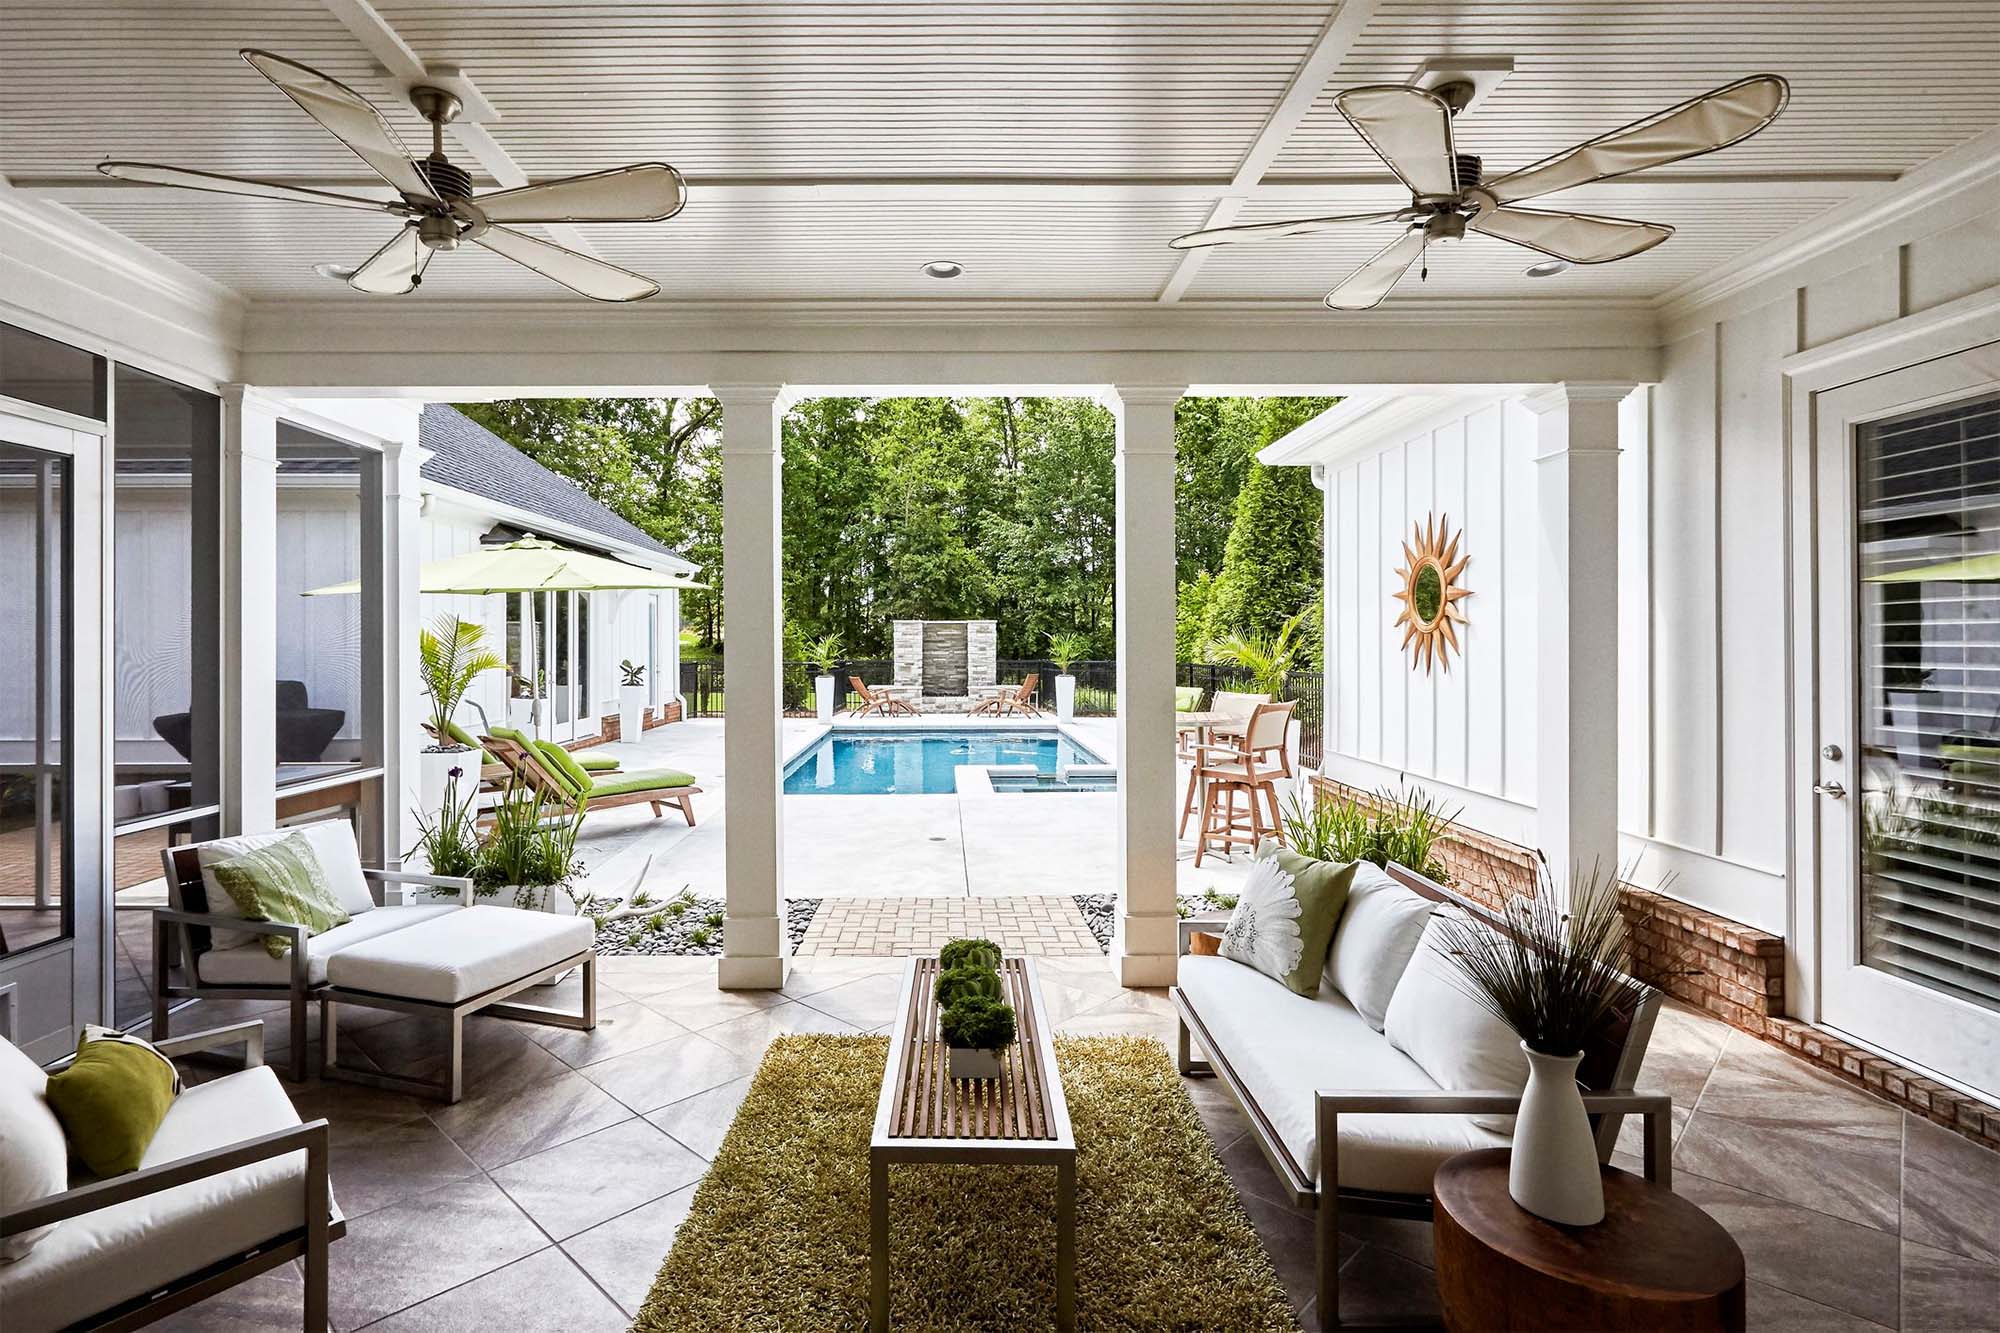 interior pool house design white siding light and bright patio furniture white cushions